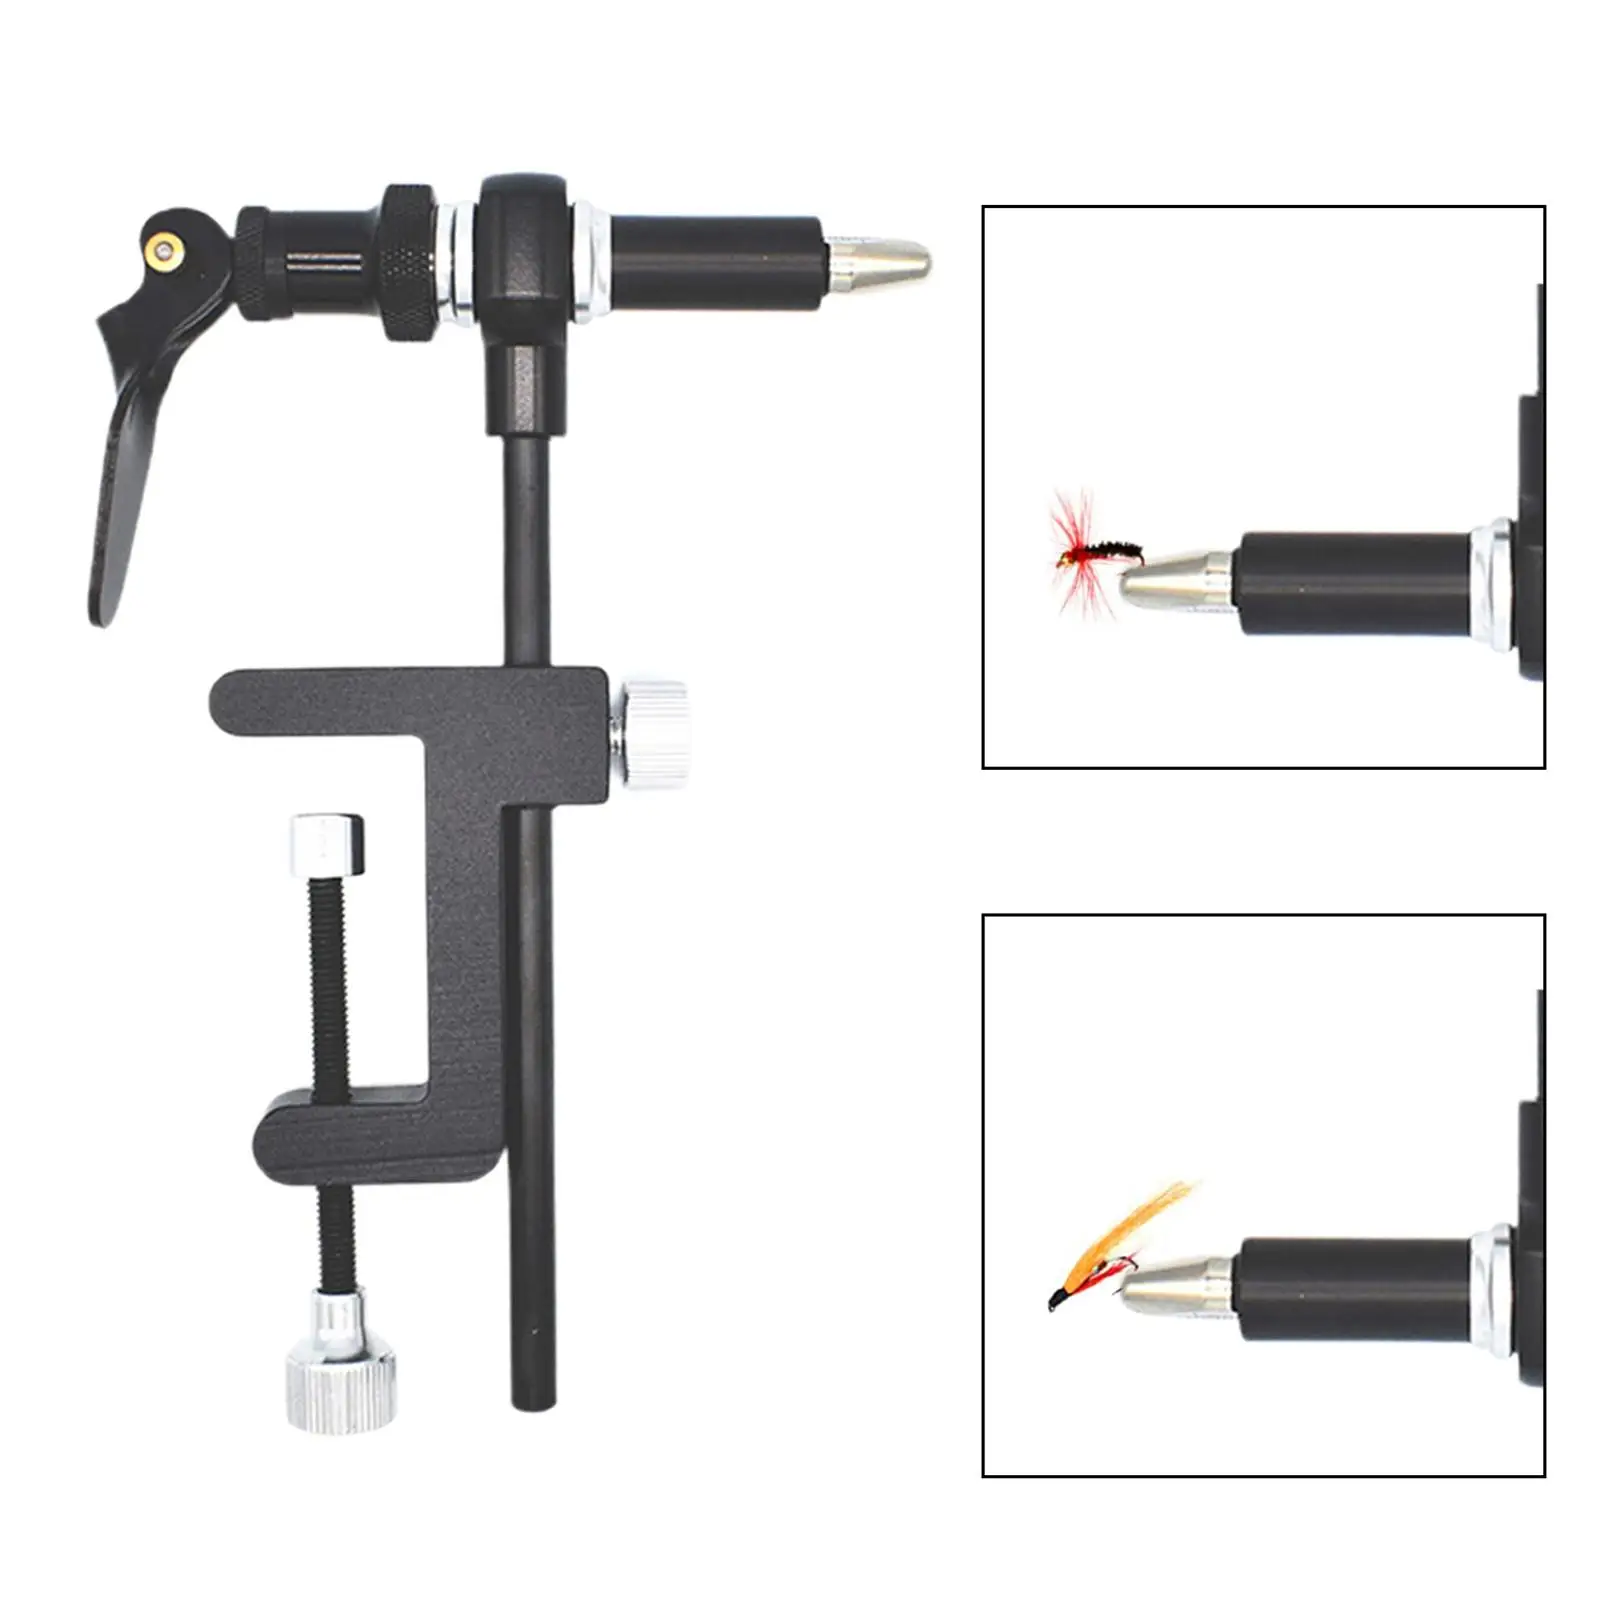 Rotary Fly Tying Vise Tools Brass C-clamp Rotating Hook Tool Steel Whip finisher Bobbin Thread Holder Basic Fly Hook Tool